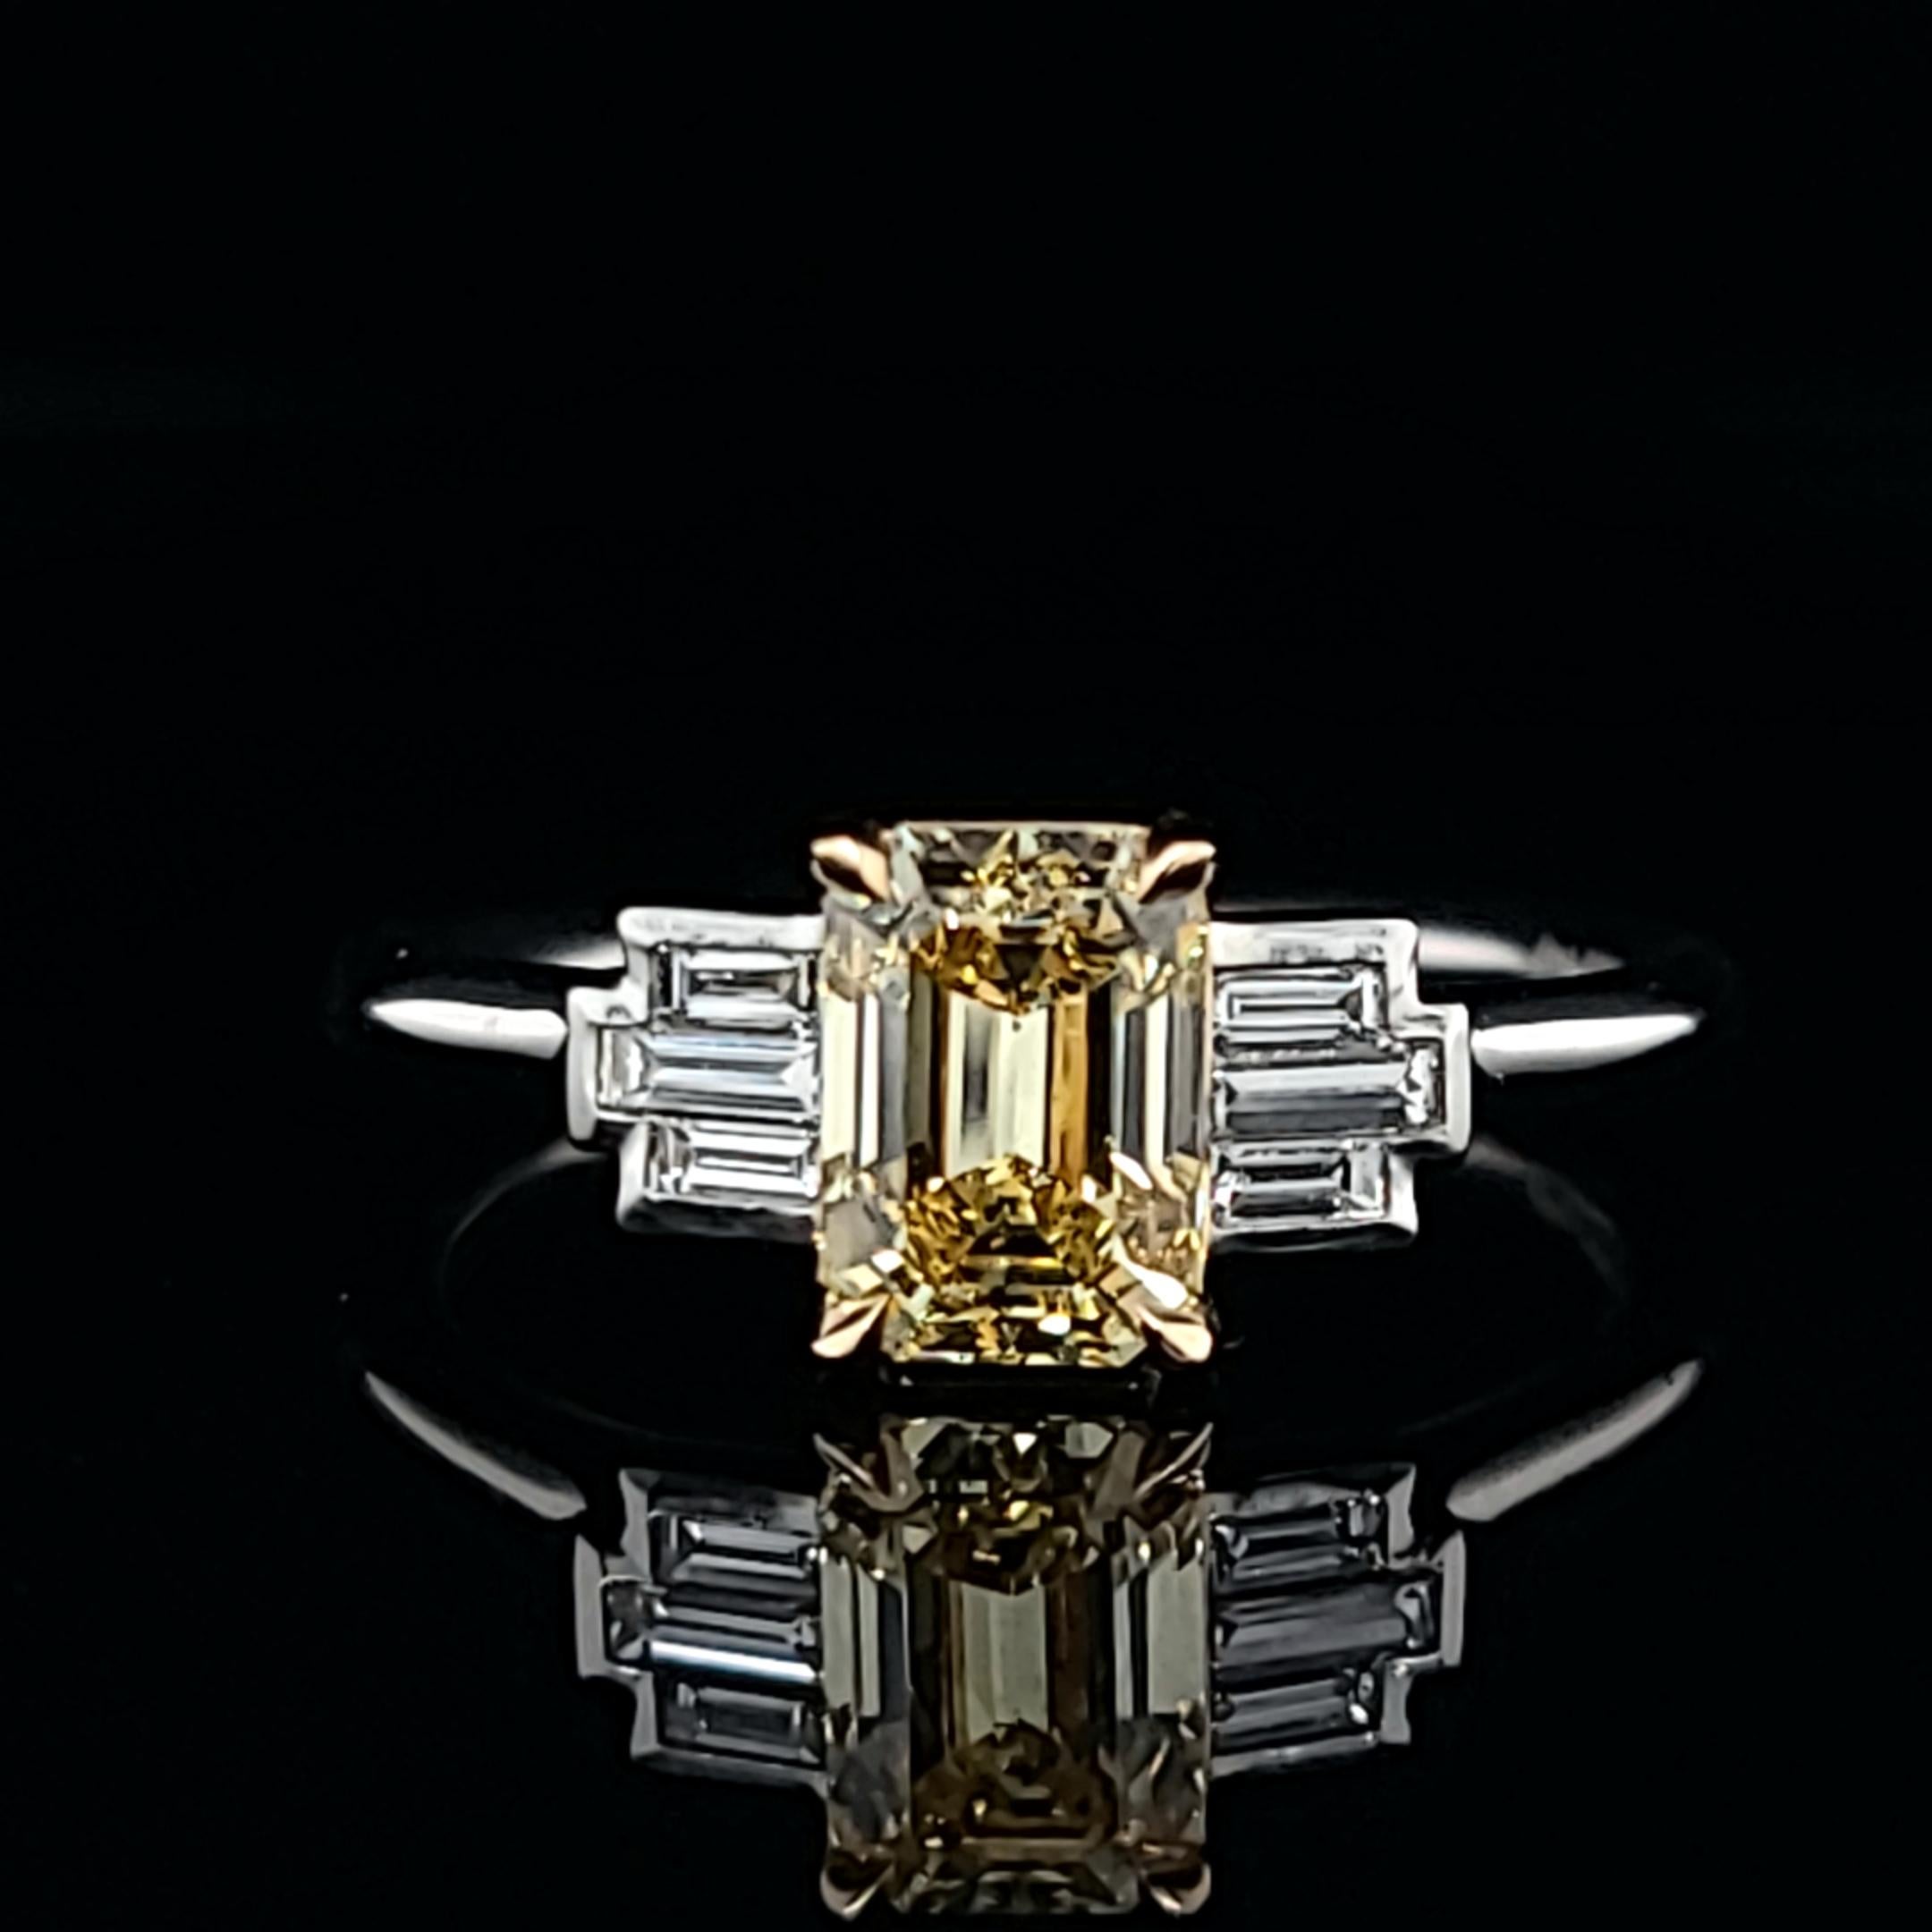 Contemporary GIA Certified 1.15 Carat Fancy Vivid Yellow Emerald Cut Handmade Ring For Sale